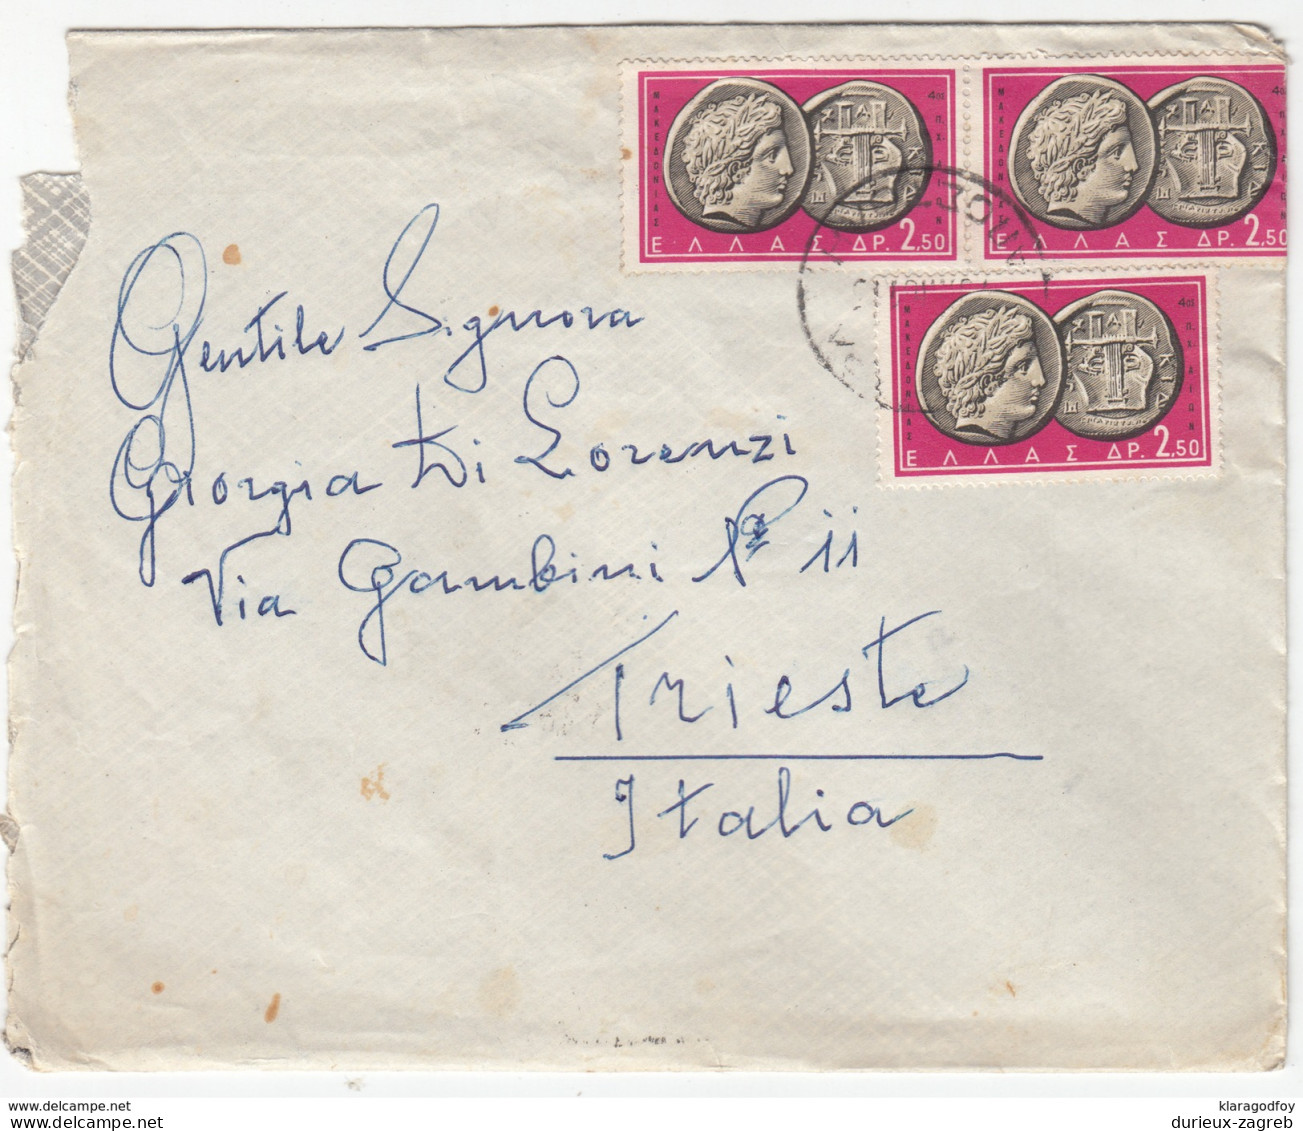 Greece Letter Cover Travelled 1961 Kerkyra To Trieste B170310 - Covers & Documents